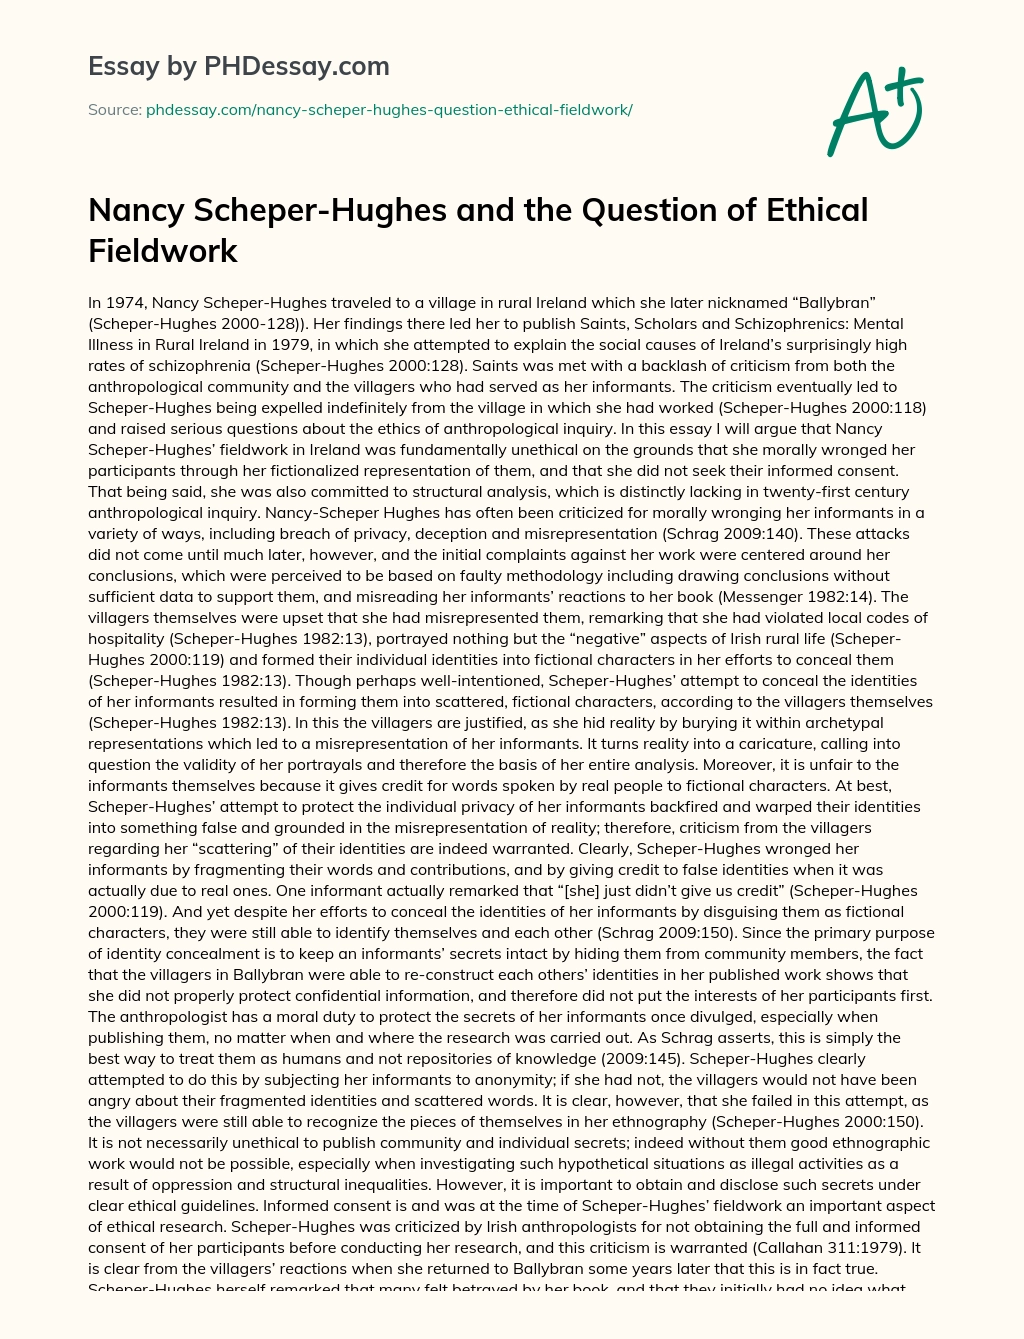 Nancy Scheper-Hughes and the Question of Ethical Fieldwork essay